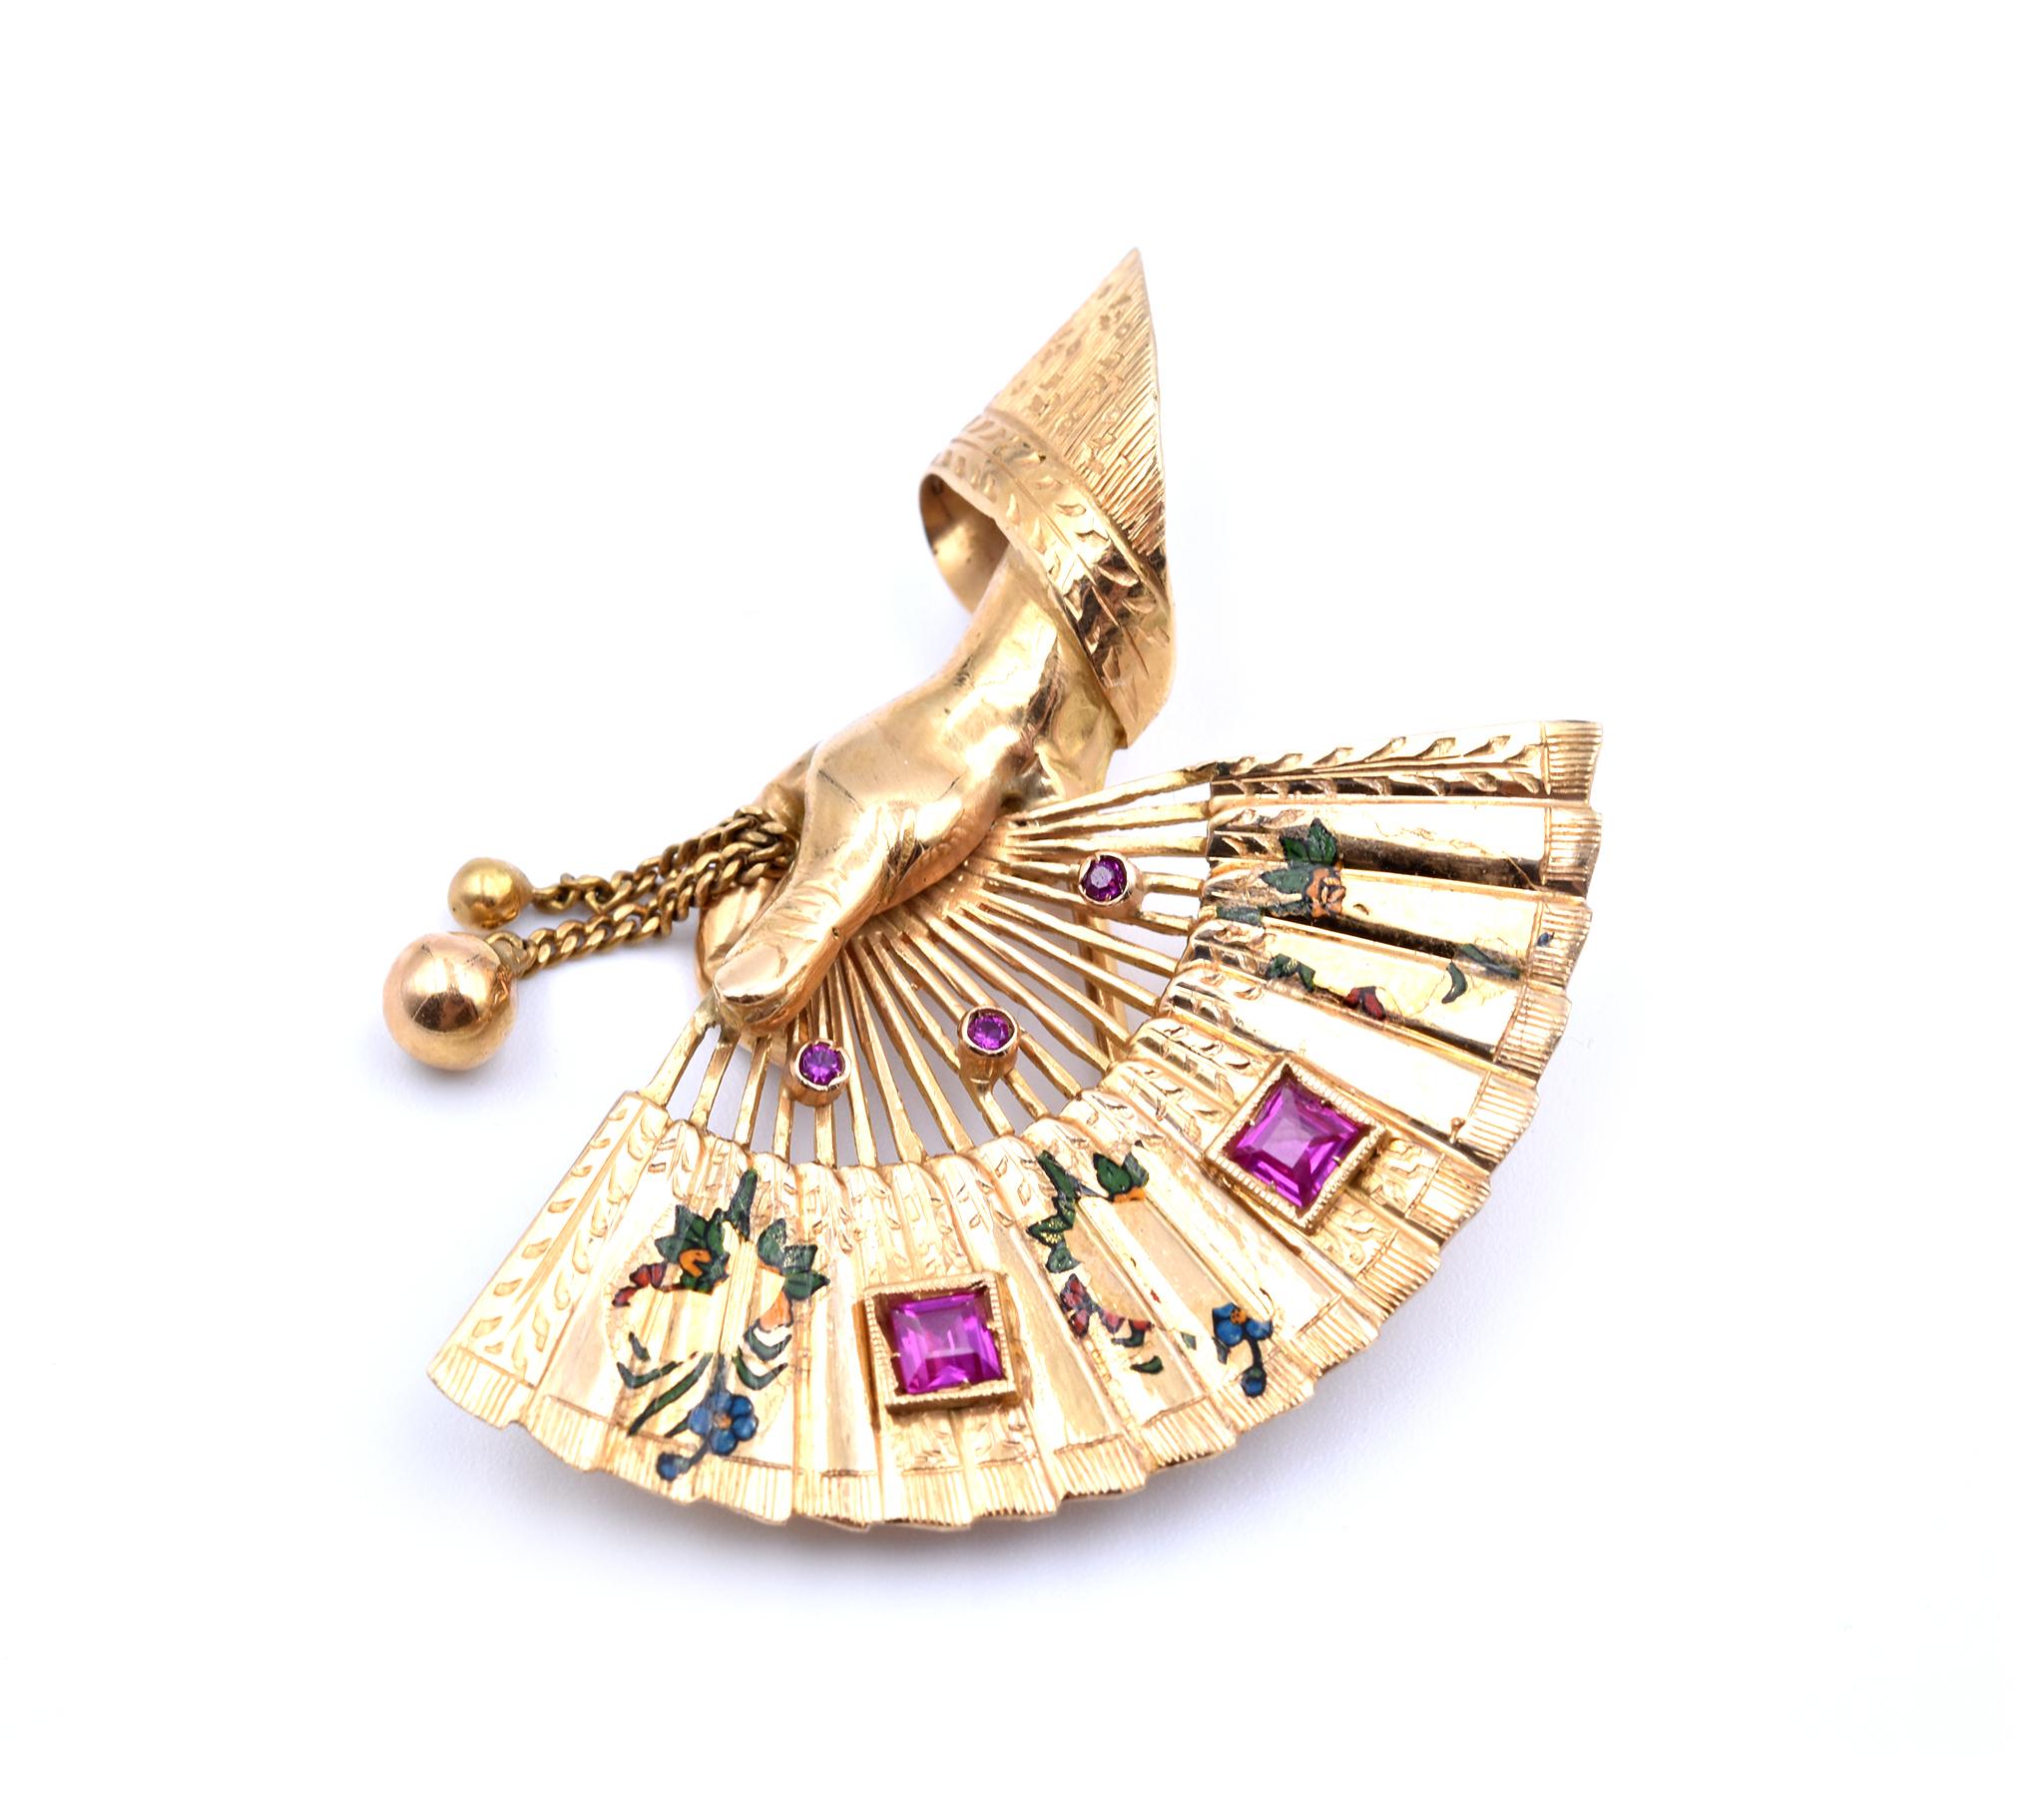 Designer: custom design
Material: 18k yellow gold 
Dimensions: pin is 28.83mm by 47.80mm
Weight: 9.92 grams
